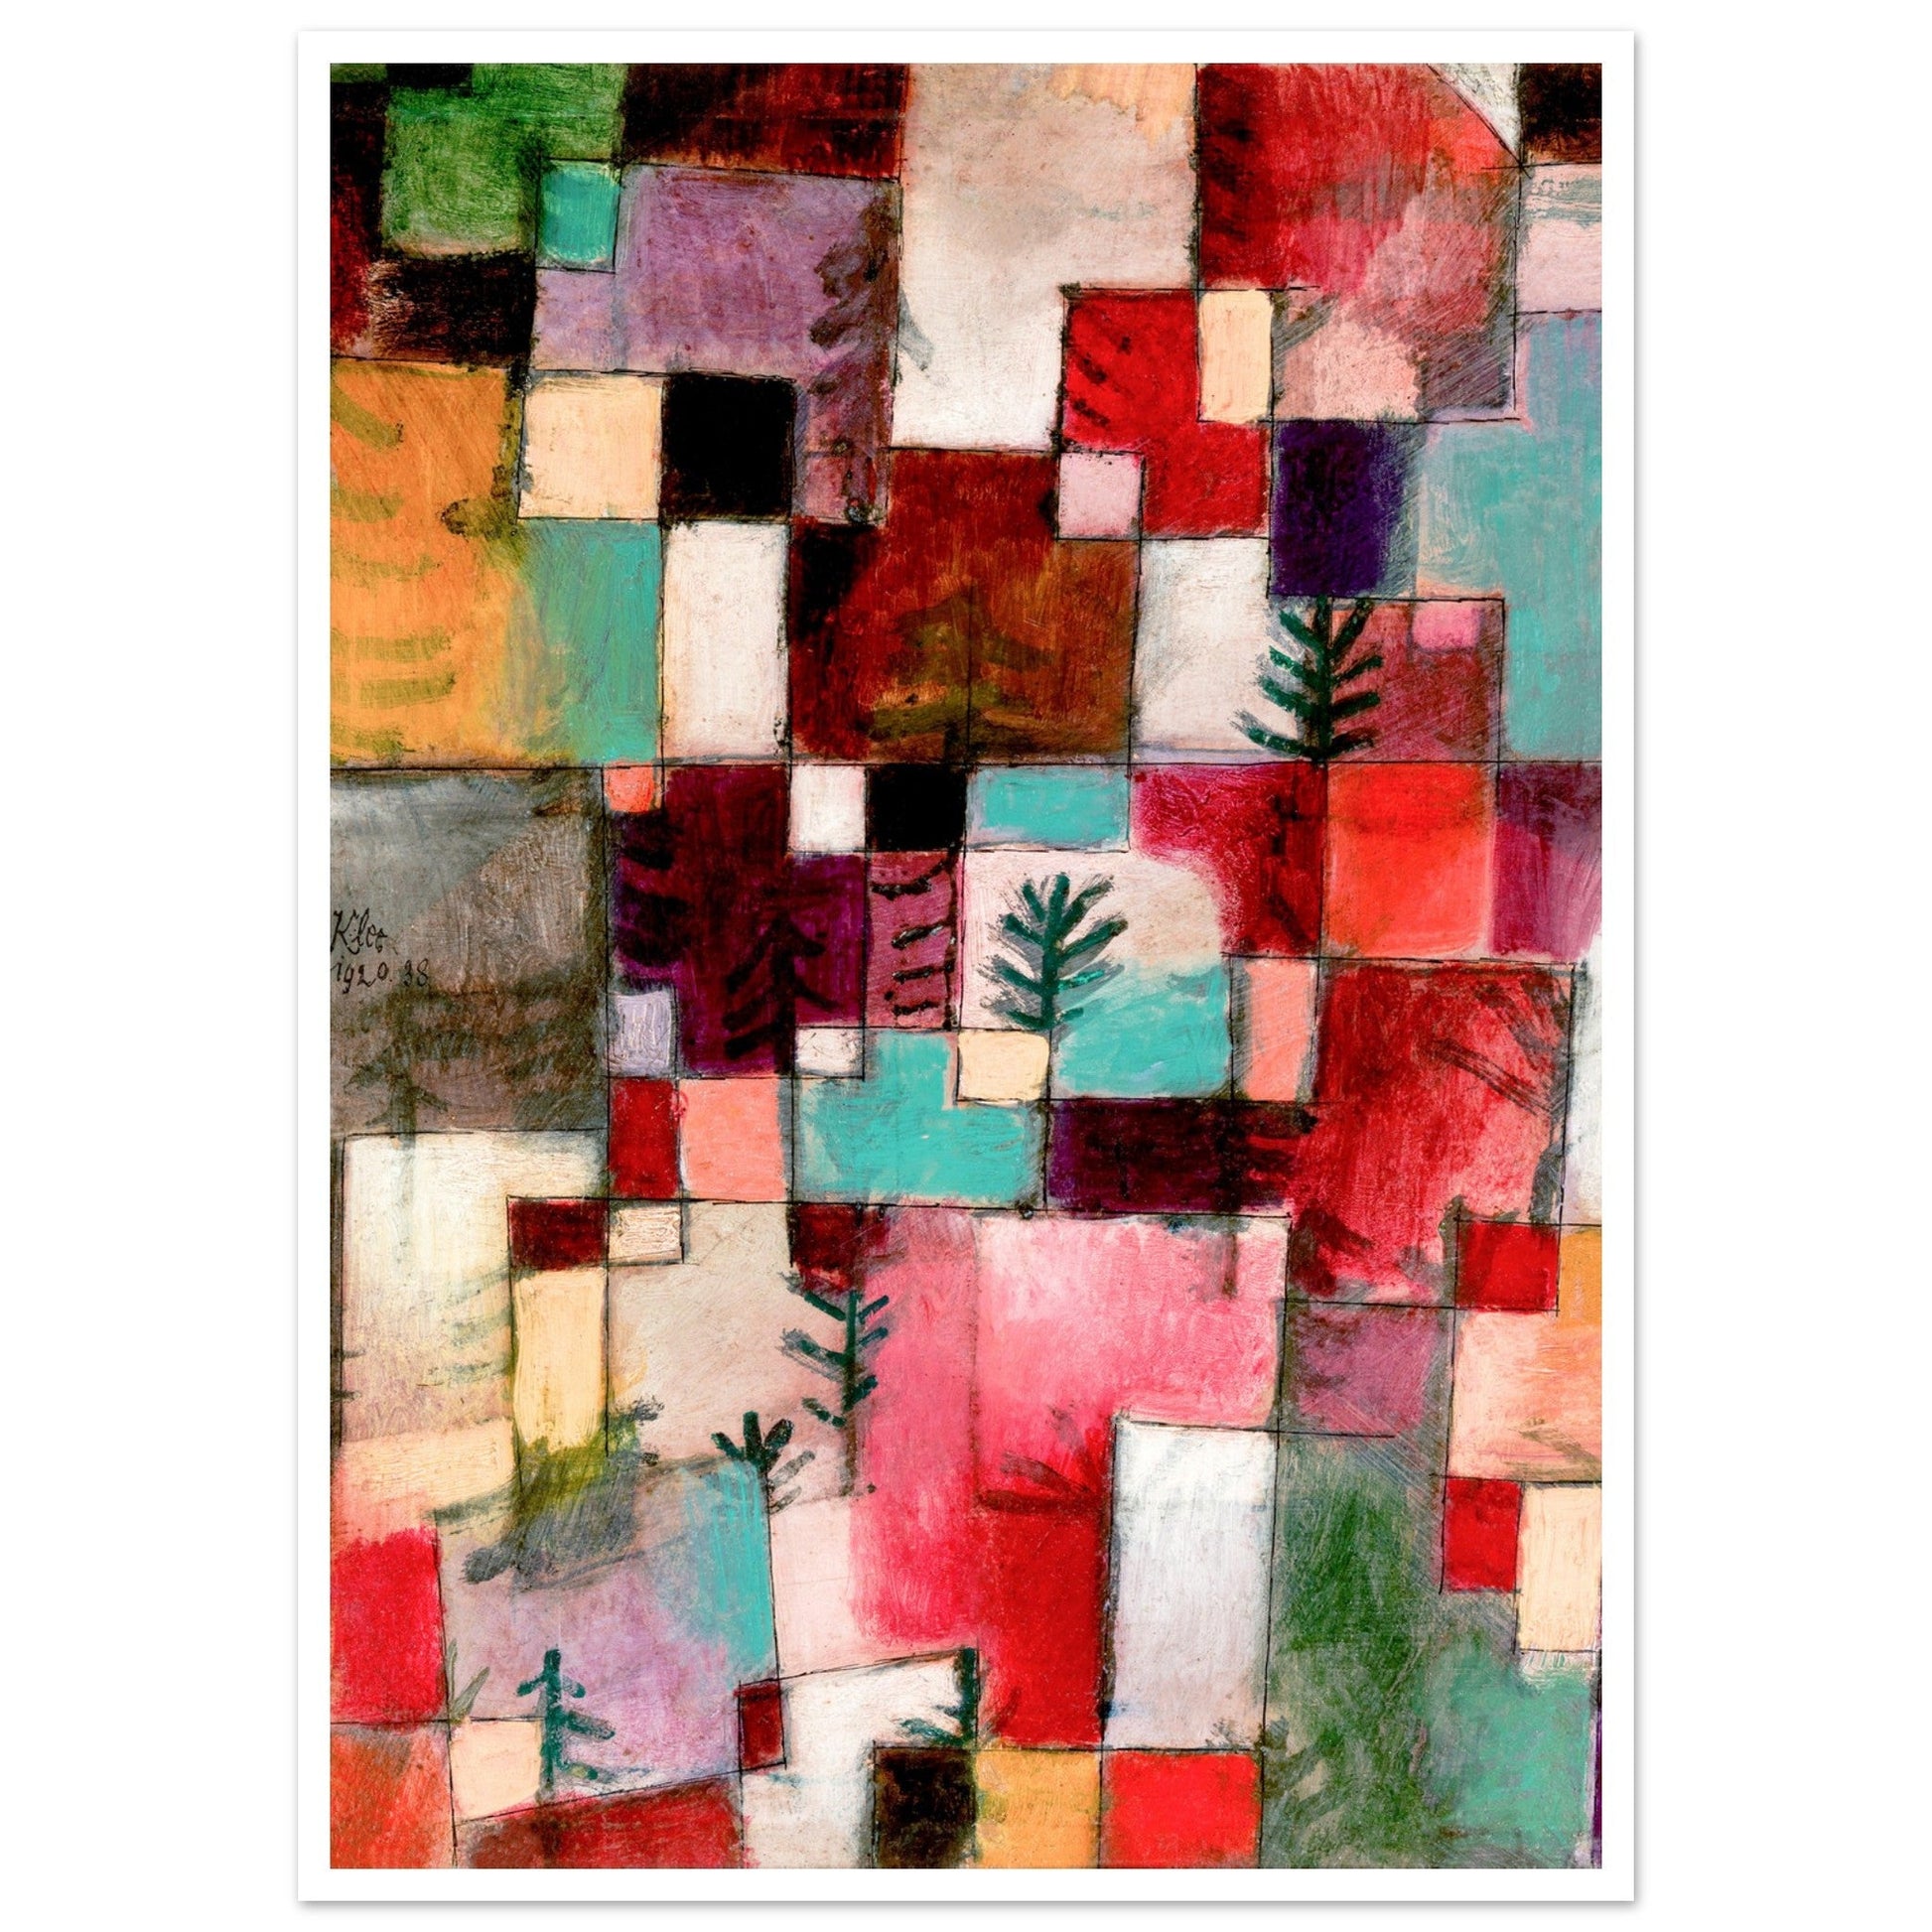 Paul Klee - Red Green and Violet–Yellow Rhythms, abstract, bauhau, paul klee, #illieeart